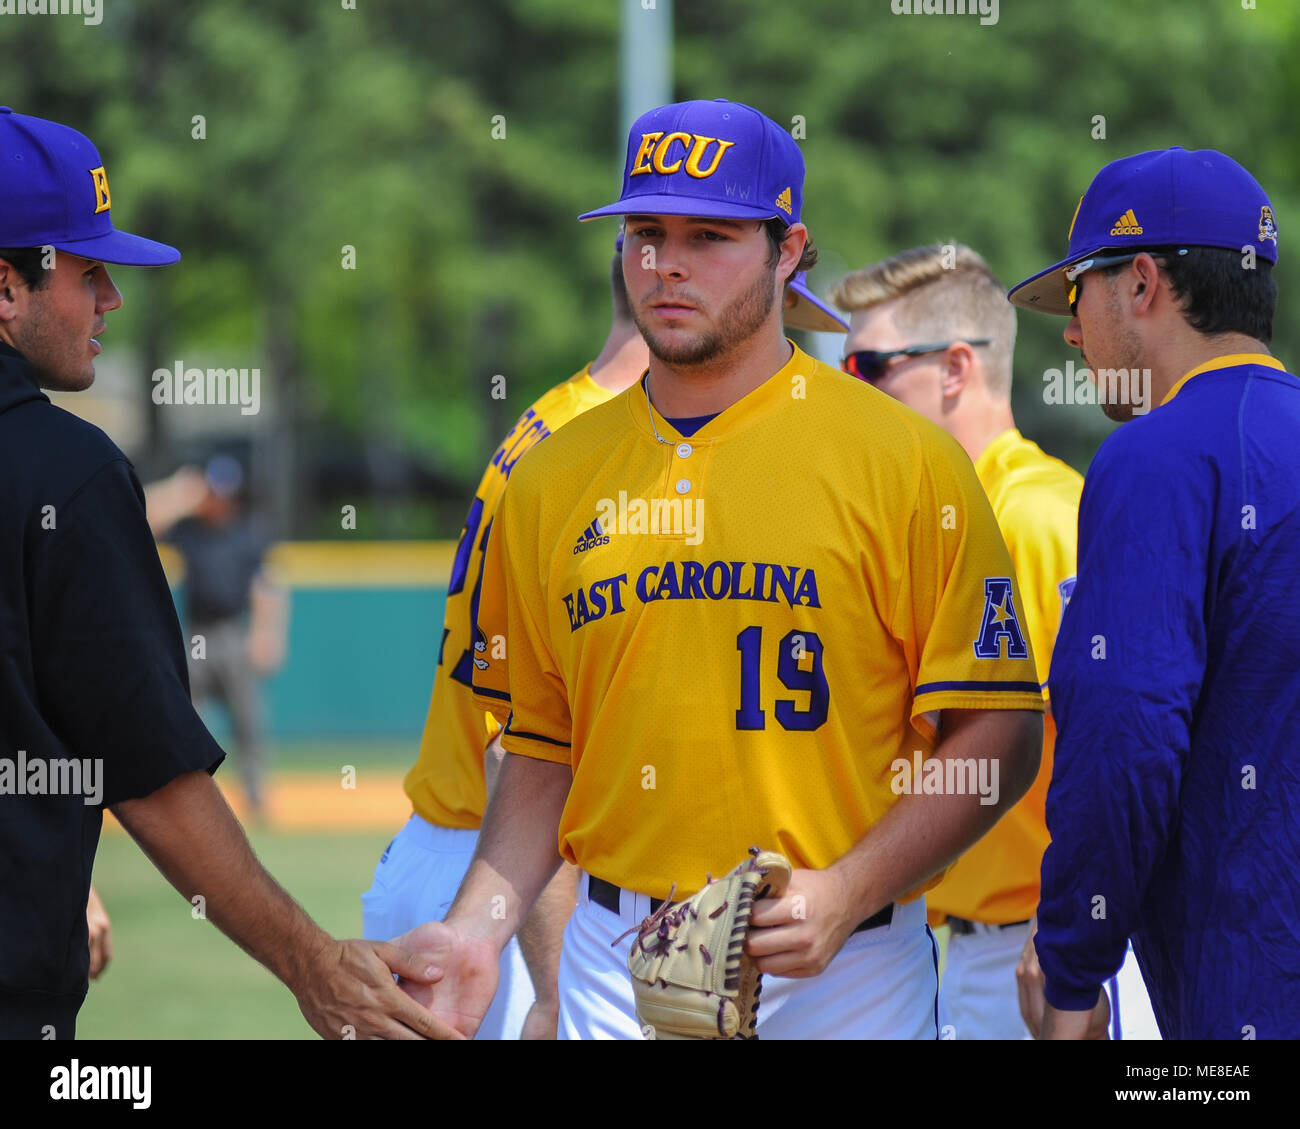 Win The Series. 21st Apr, 2018. TN, USA; Pirates pitcher, Alec Burleson  (19), is congratulated by teammates during the match with Memphis. The ECU  Pirates defeated Memphis, 4-2, at FedEx Park to